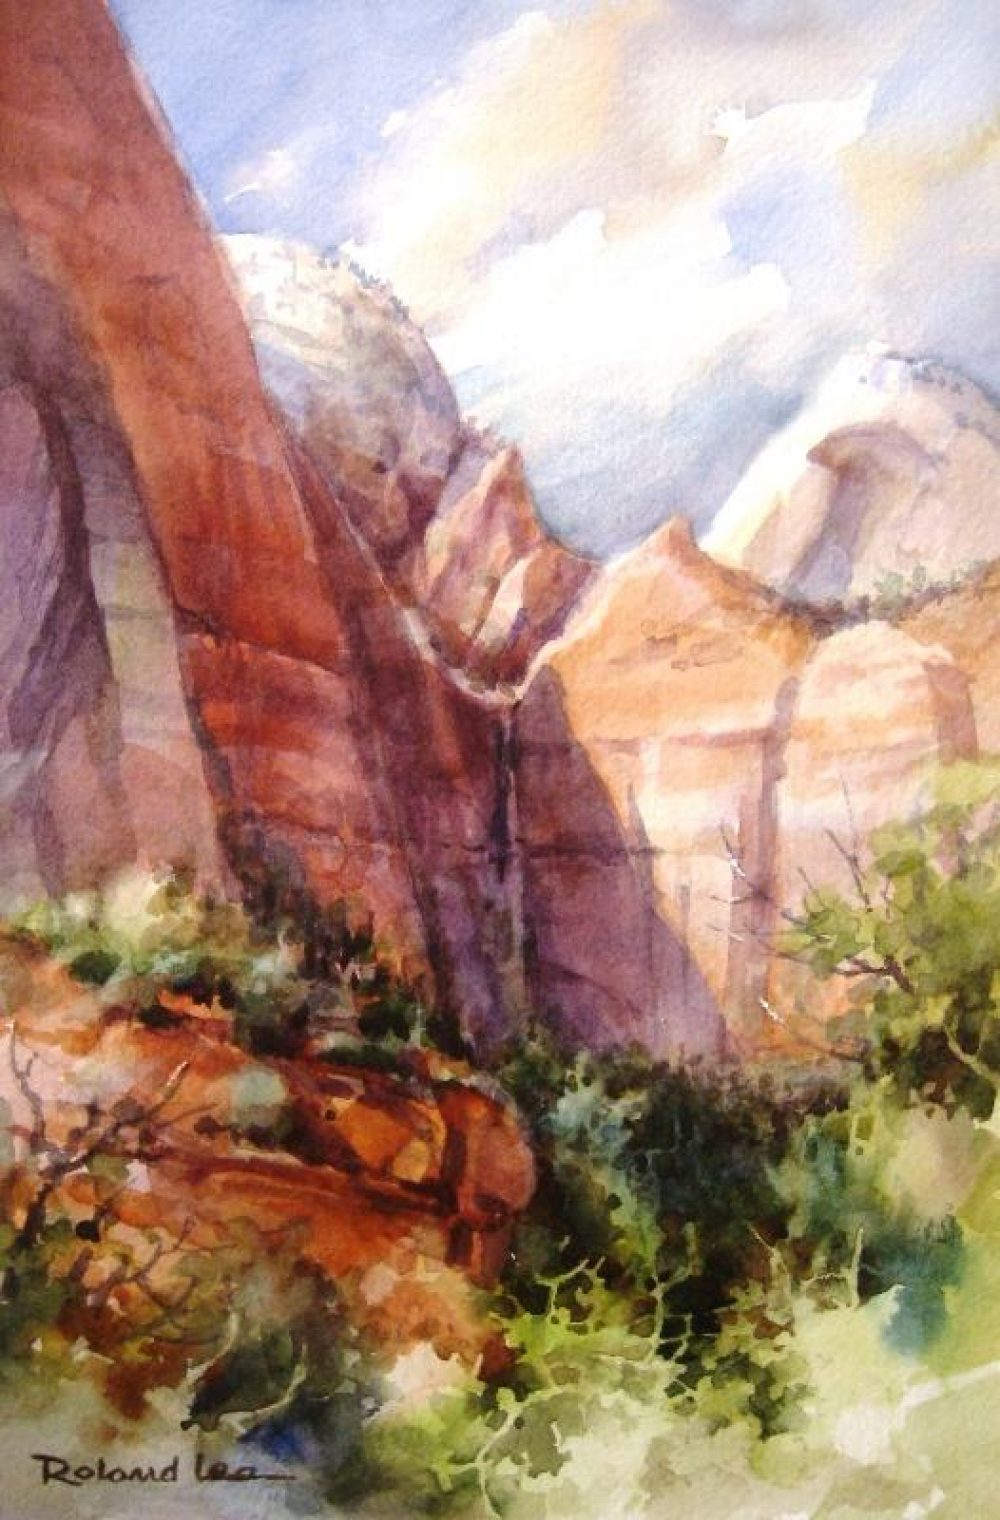 Emerald Falls in Zion National Park - Plein Air Watercolor completed during Footsteps of Thomas Moran event in Zion National Park